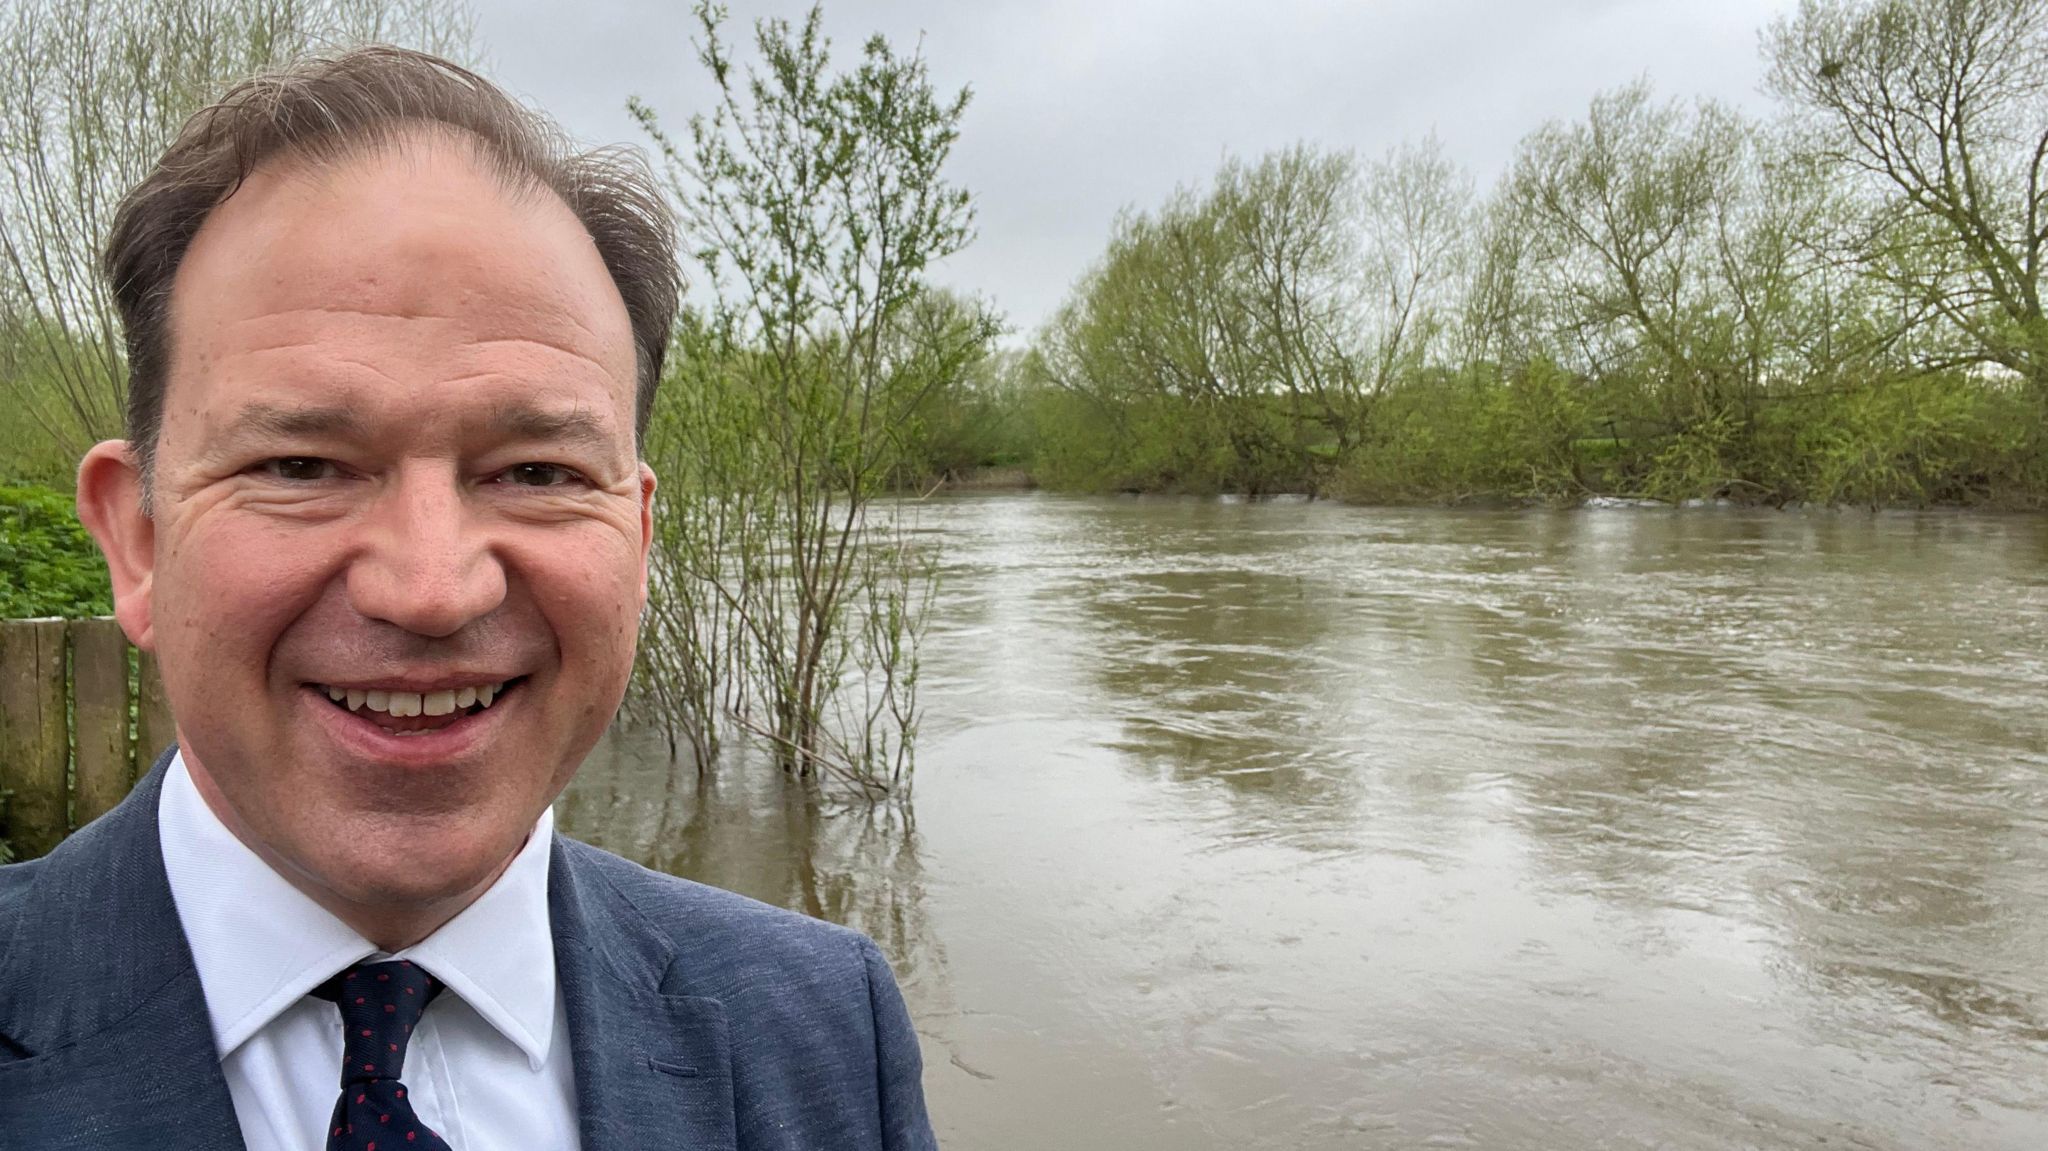 Conservative MP Jesse Norman by the river wye